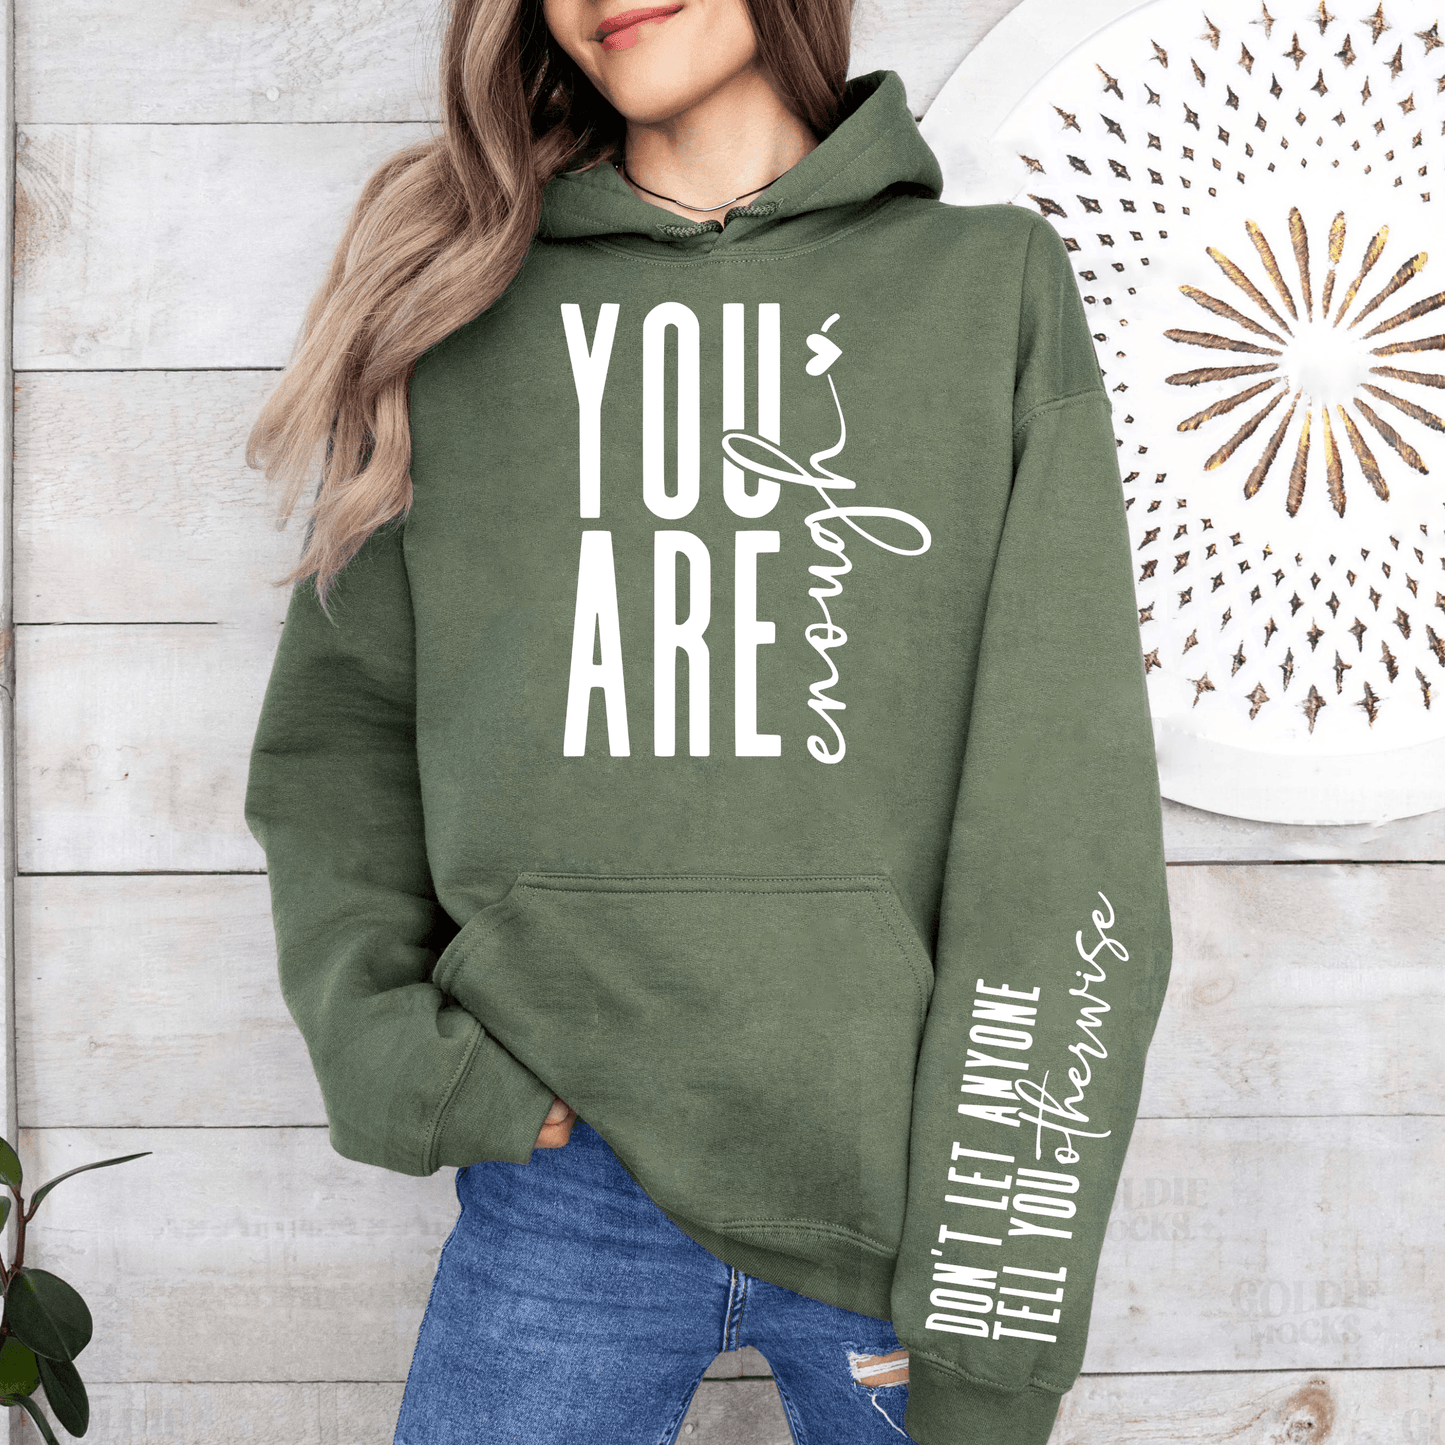 You Are Enough - Inspirational Message, Self Love Gift - GiftHaus